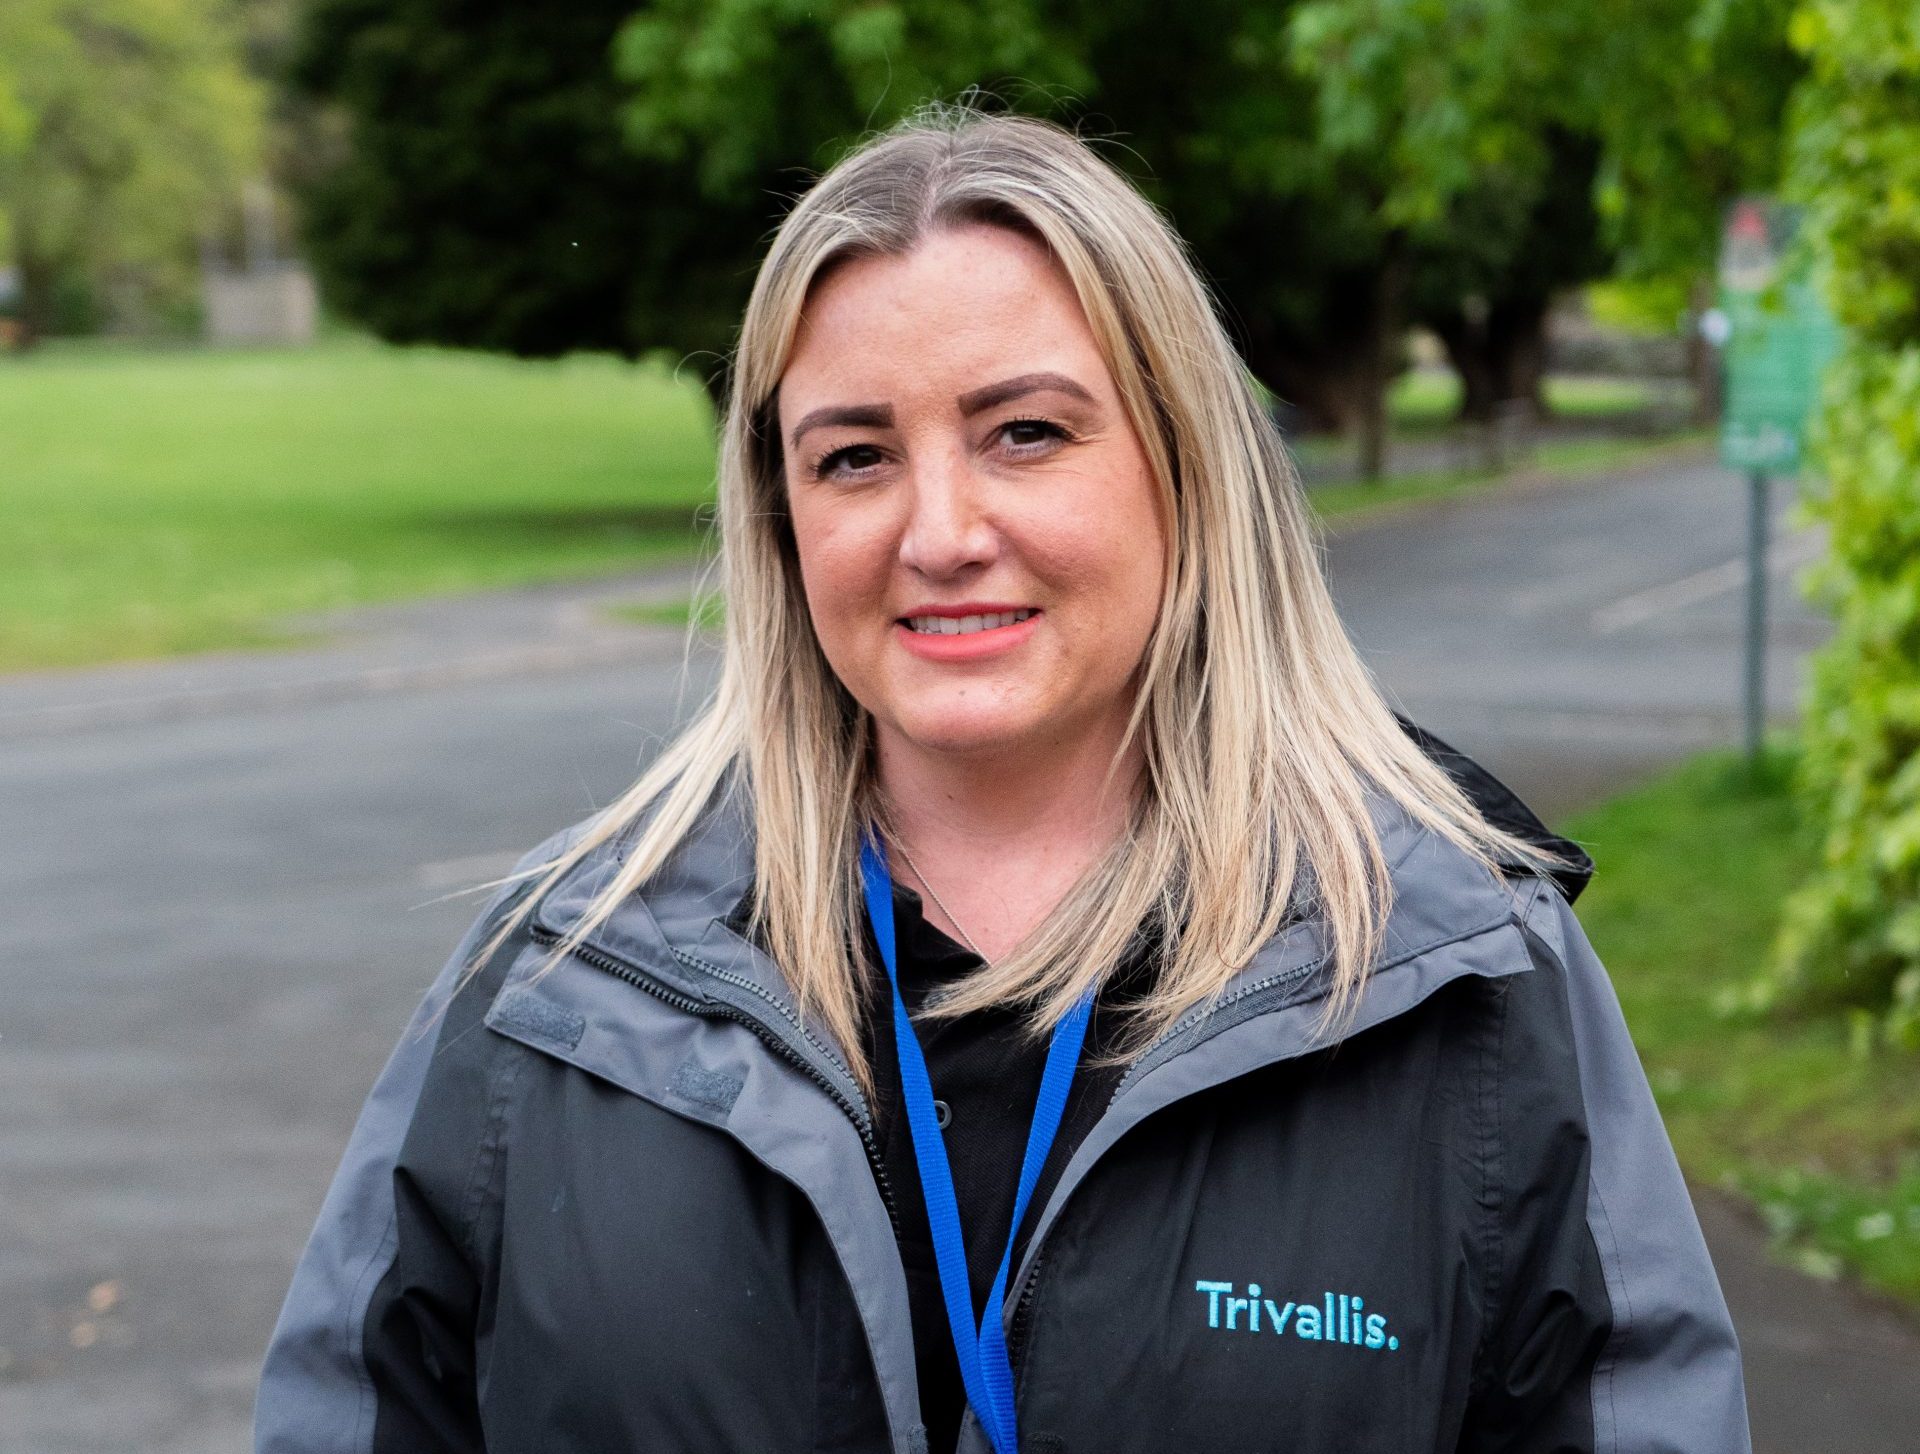 Trivallis Housing Landlord Wales A woman with long blonde hair stands outdoors, wearing a black jacket labeled "trivallis" and an id badge. a grassy area and trees are in the background.